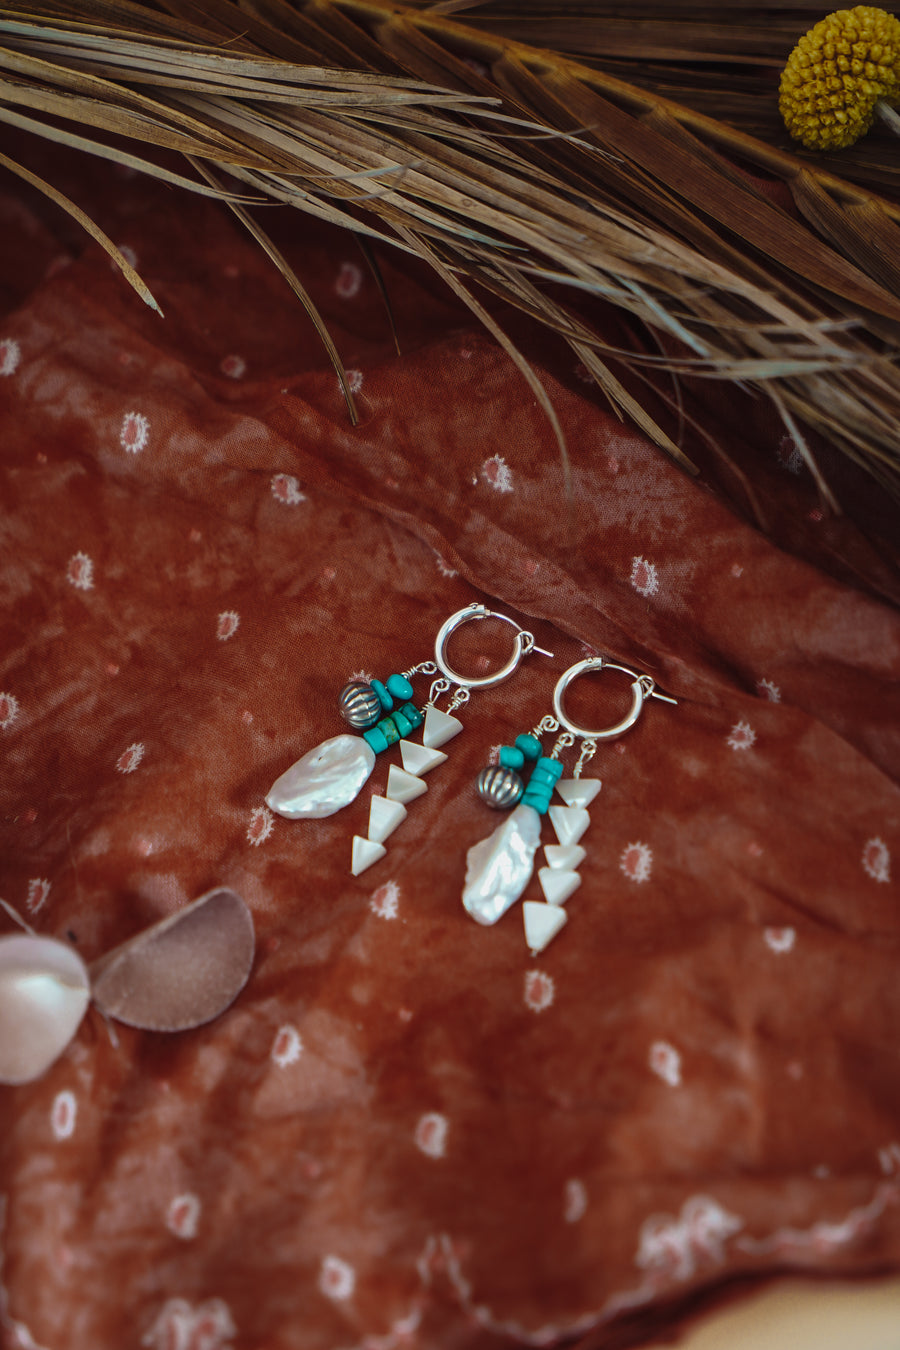 Charmed Earrings in Blue Ridge Turquoise, Mother of Pearl, & Sterling Silver Beads